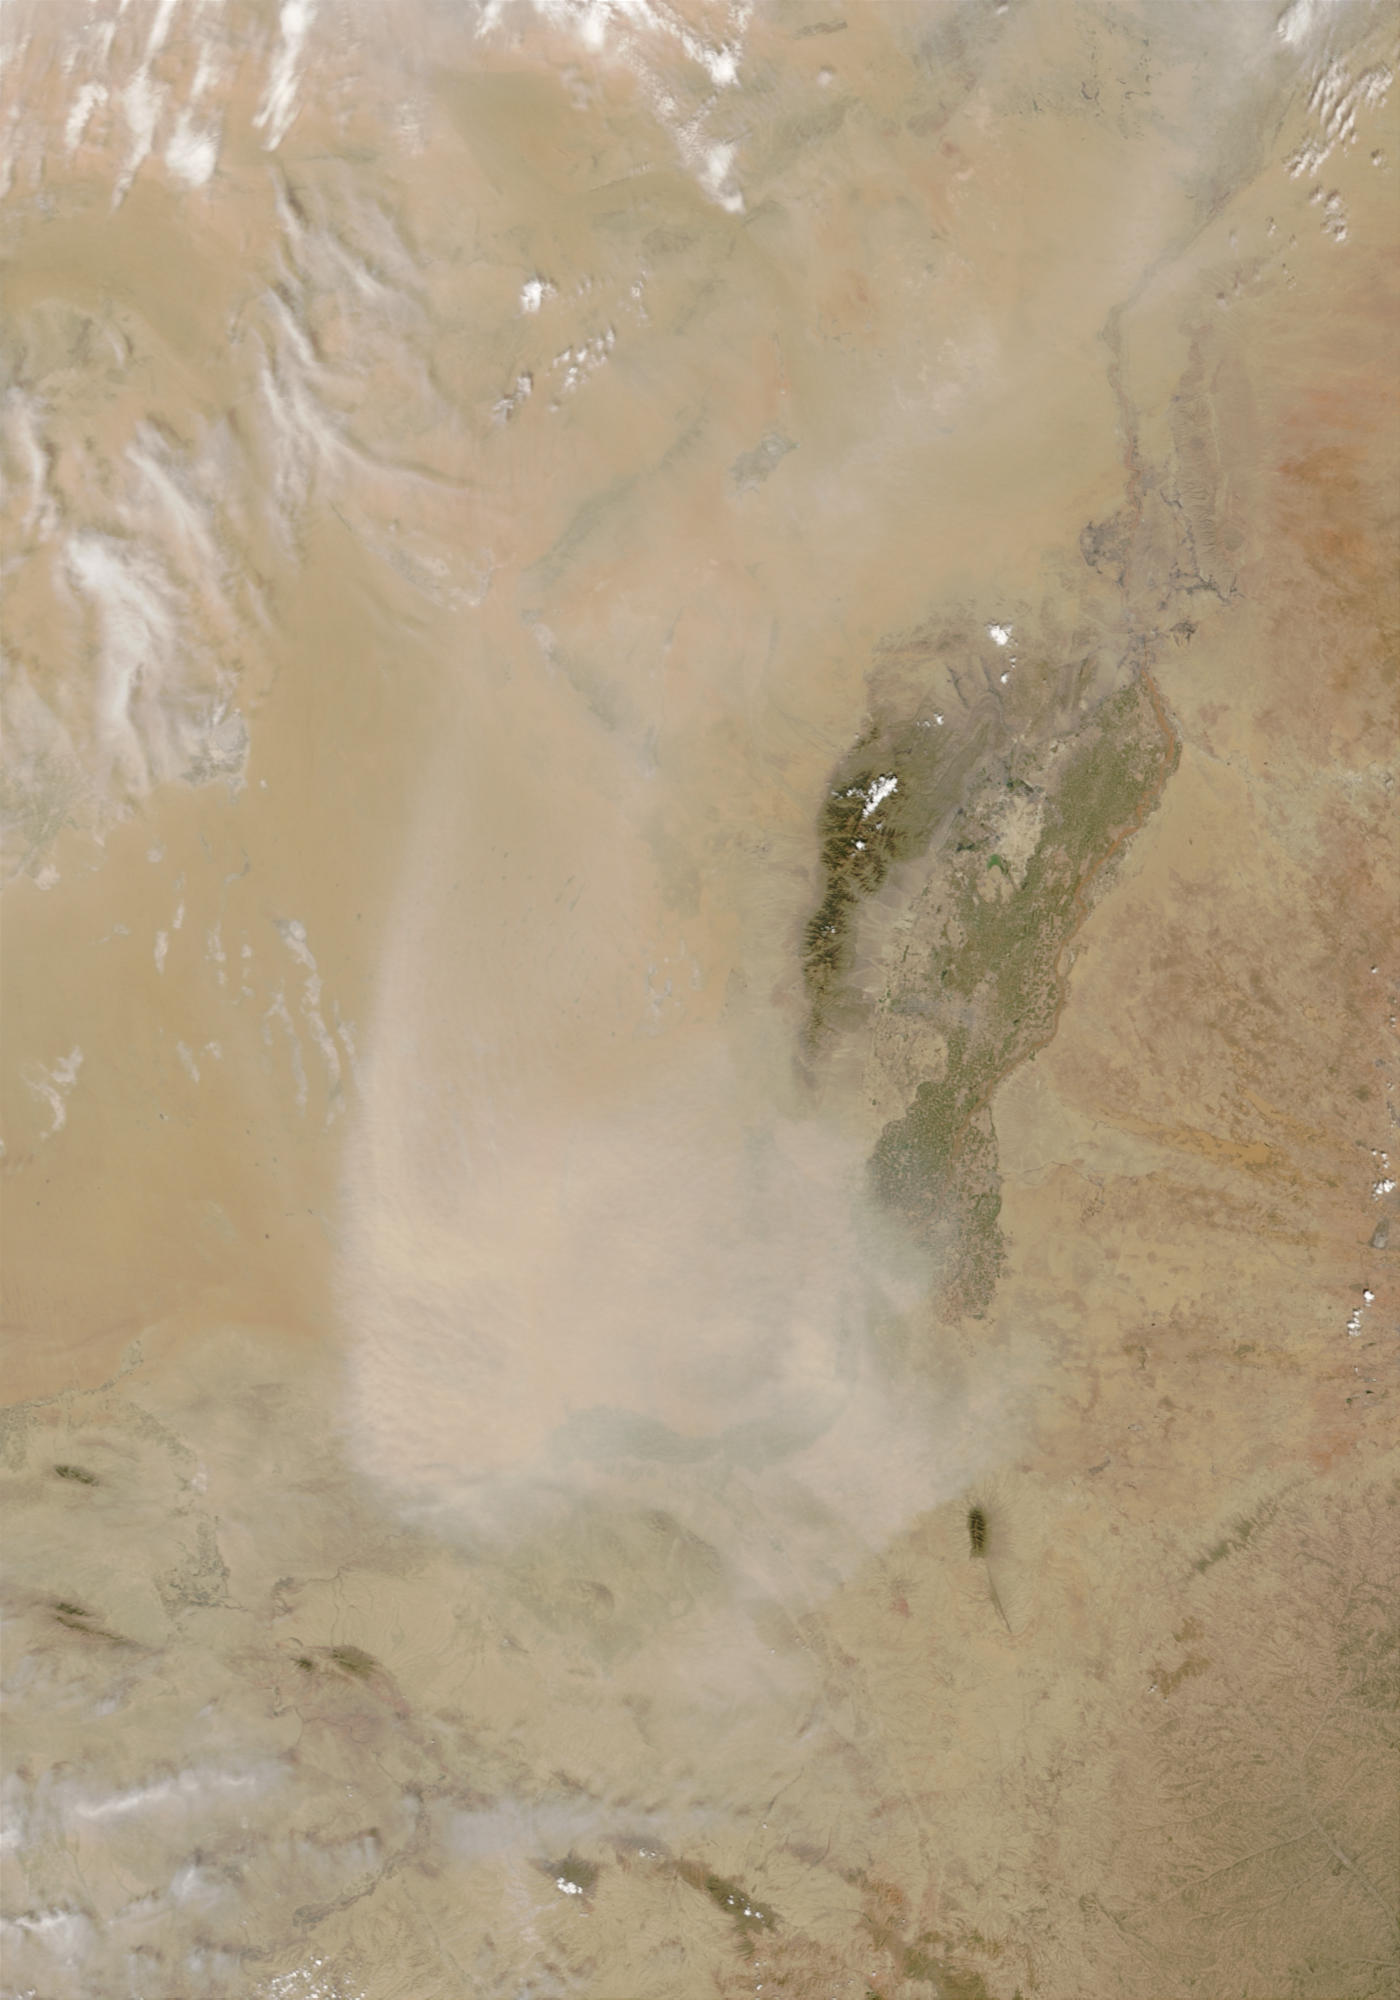 Dust storm in Tengger Desert, northcentral China - related image preview